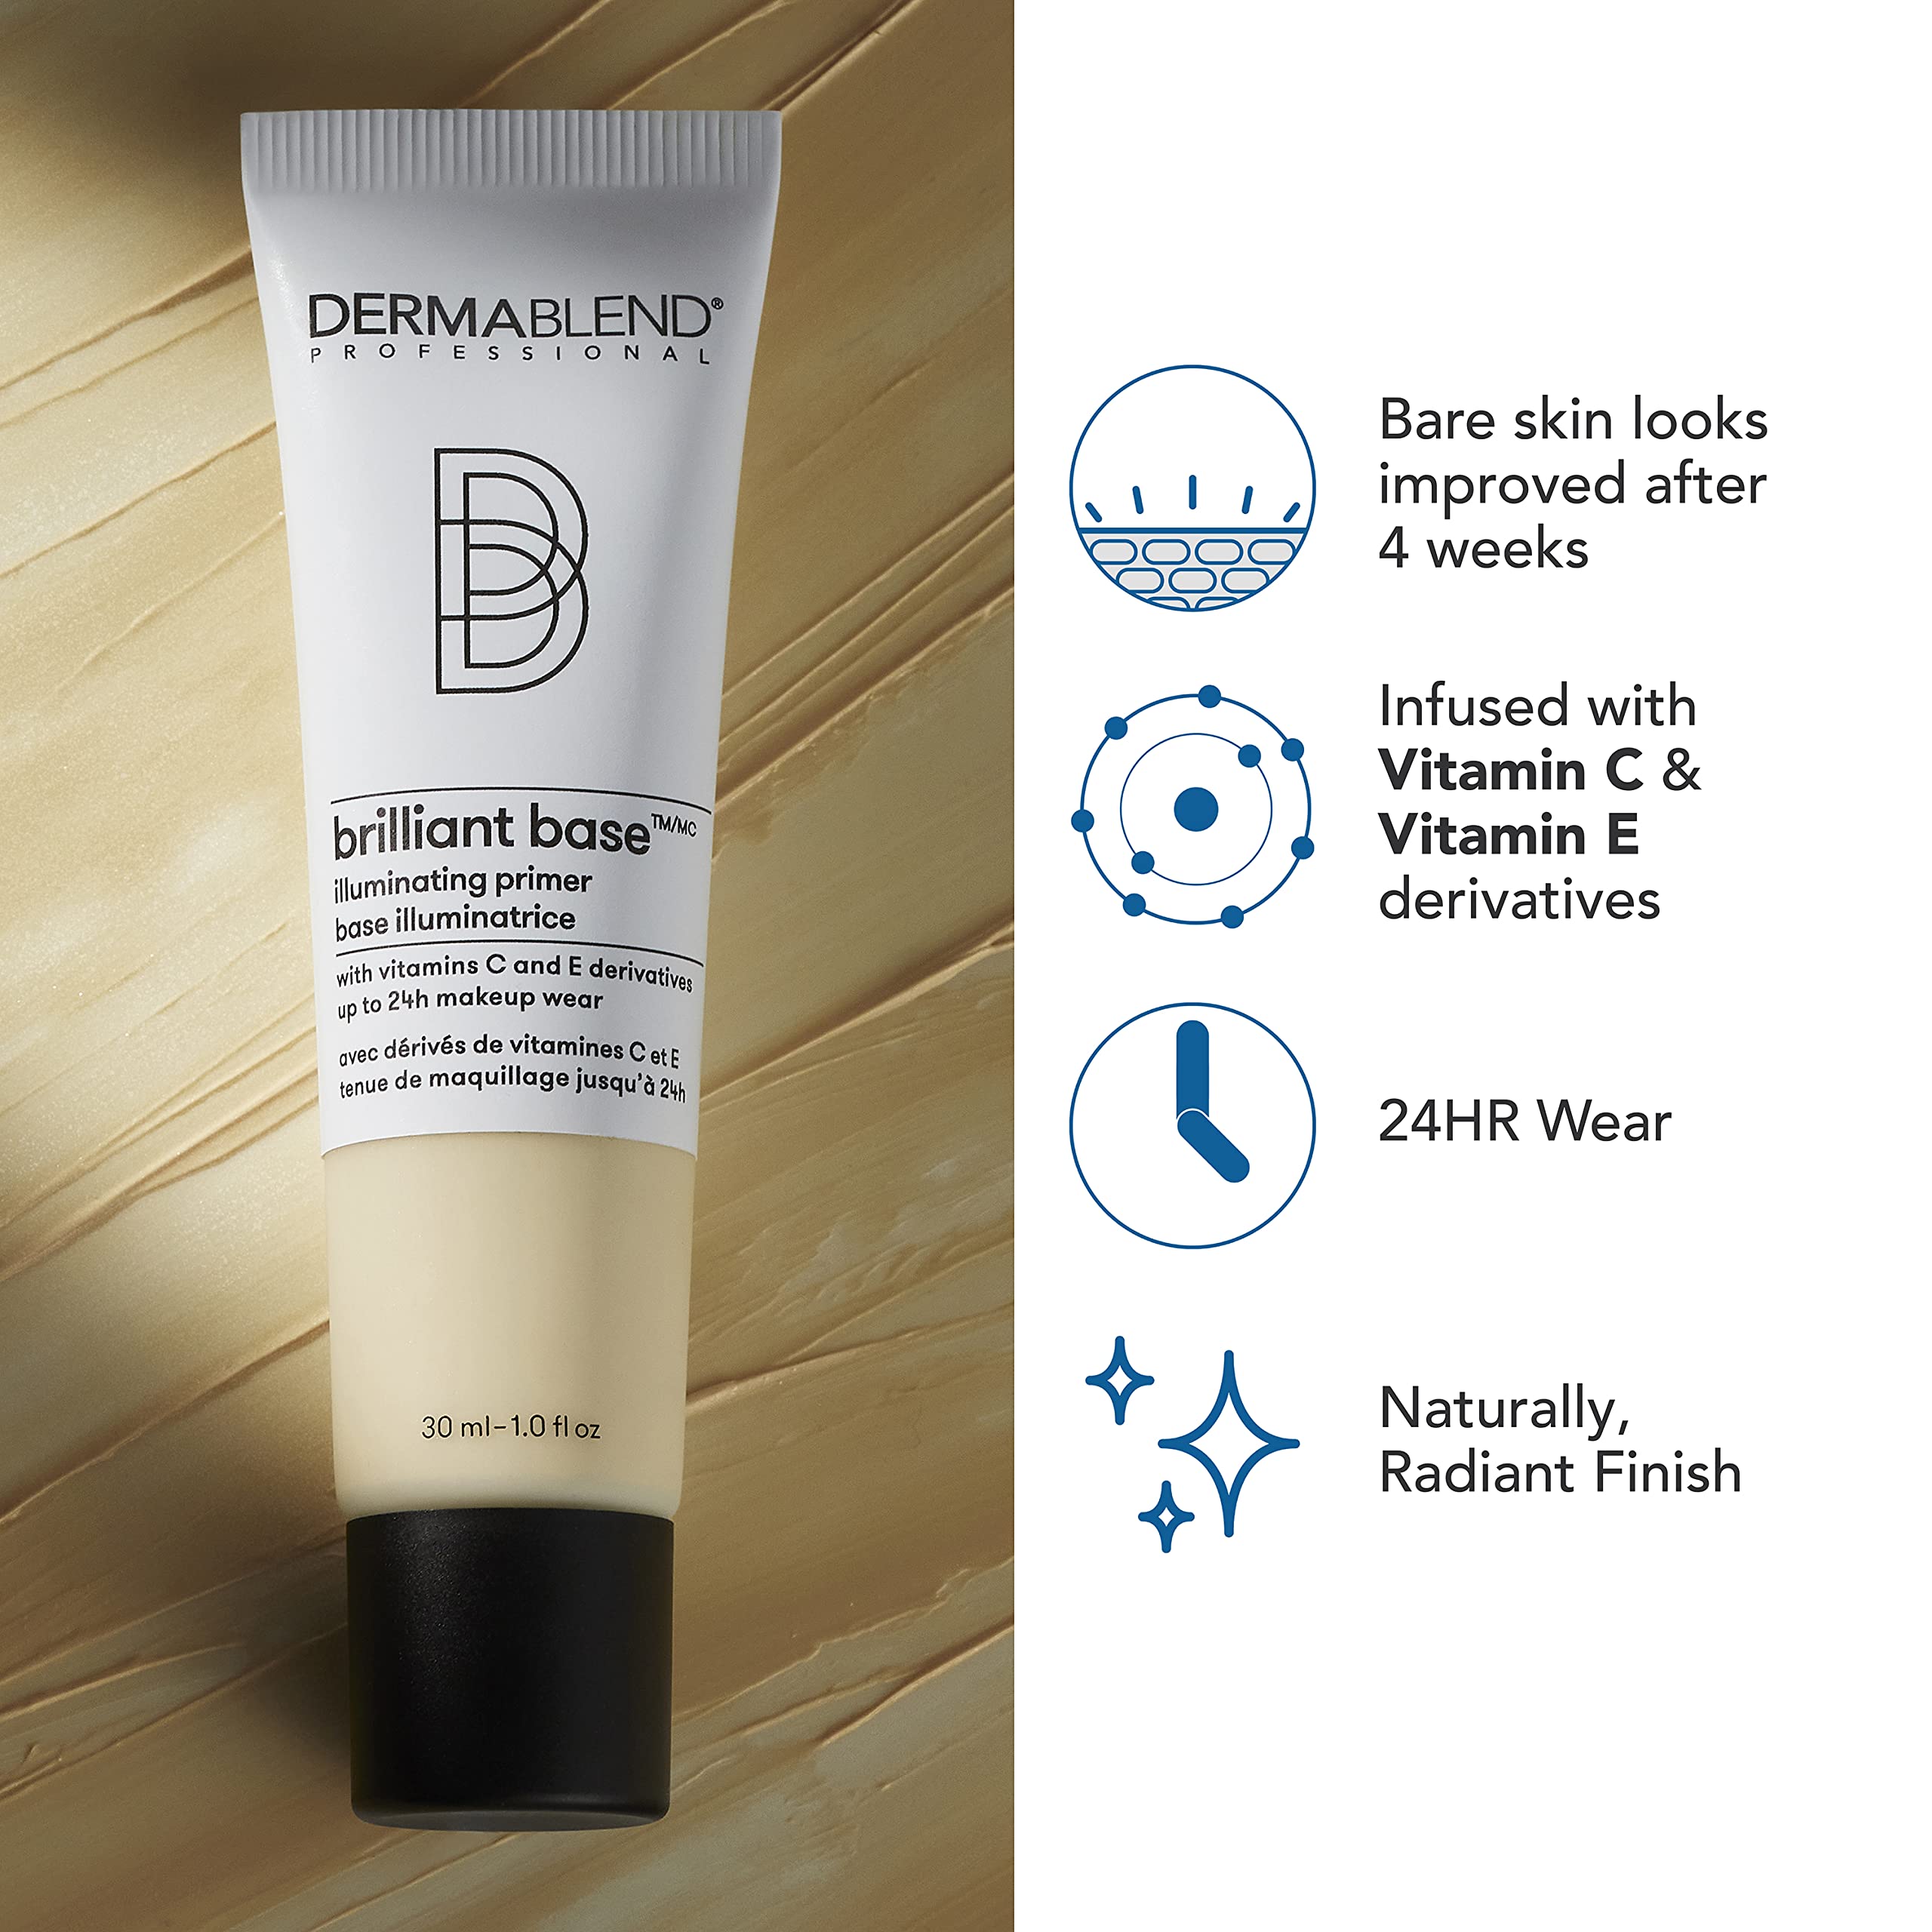 Dermablend Brilliant Base Illuminating Primer Face Makeup - Formulated with Niacinamide, Shea Butter, and Glycerin, Enriched with Vitamin C and E Derivatives, Provides Long Lasting Radiance, 1 Fl Oz